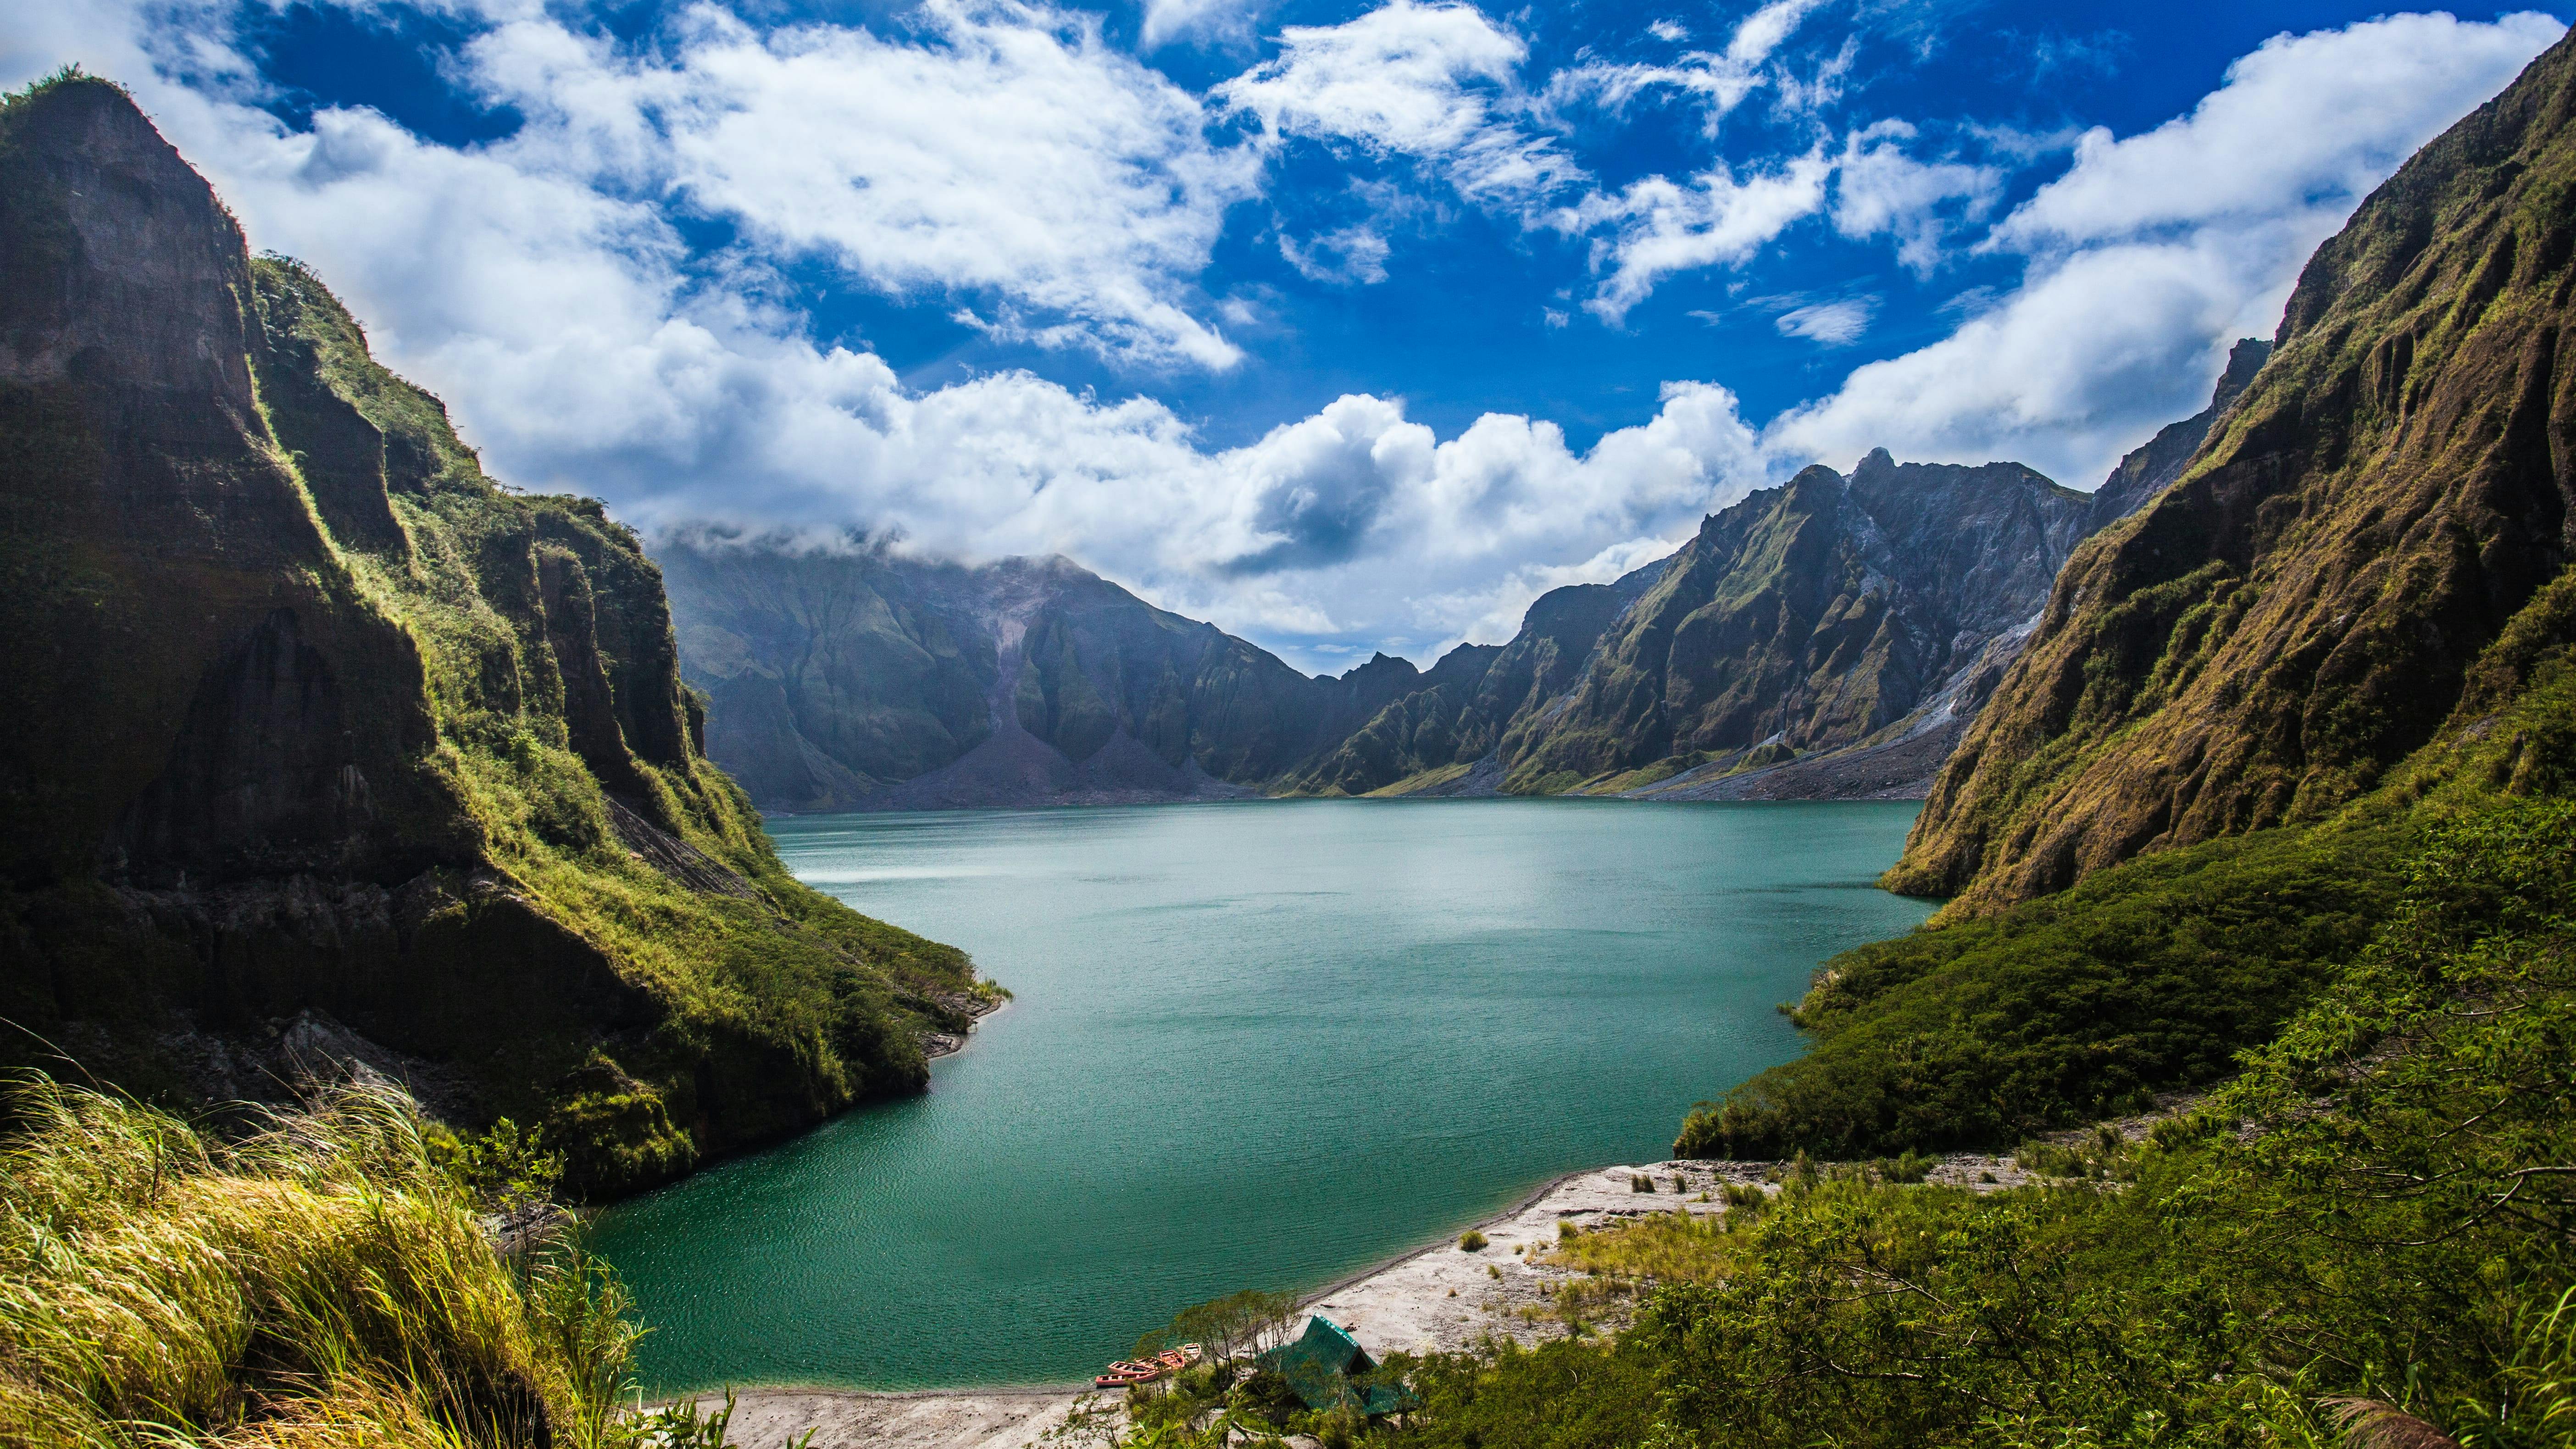 Famous crater lake in Mt. Pinatubo